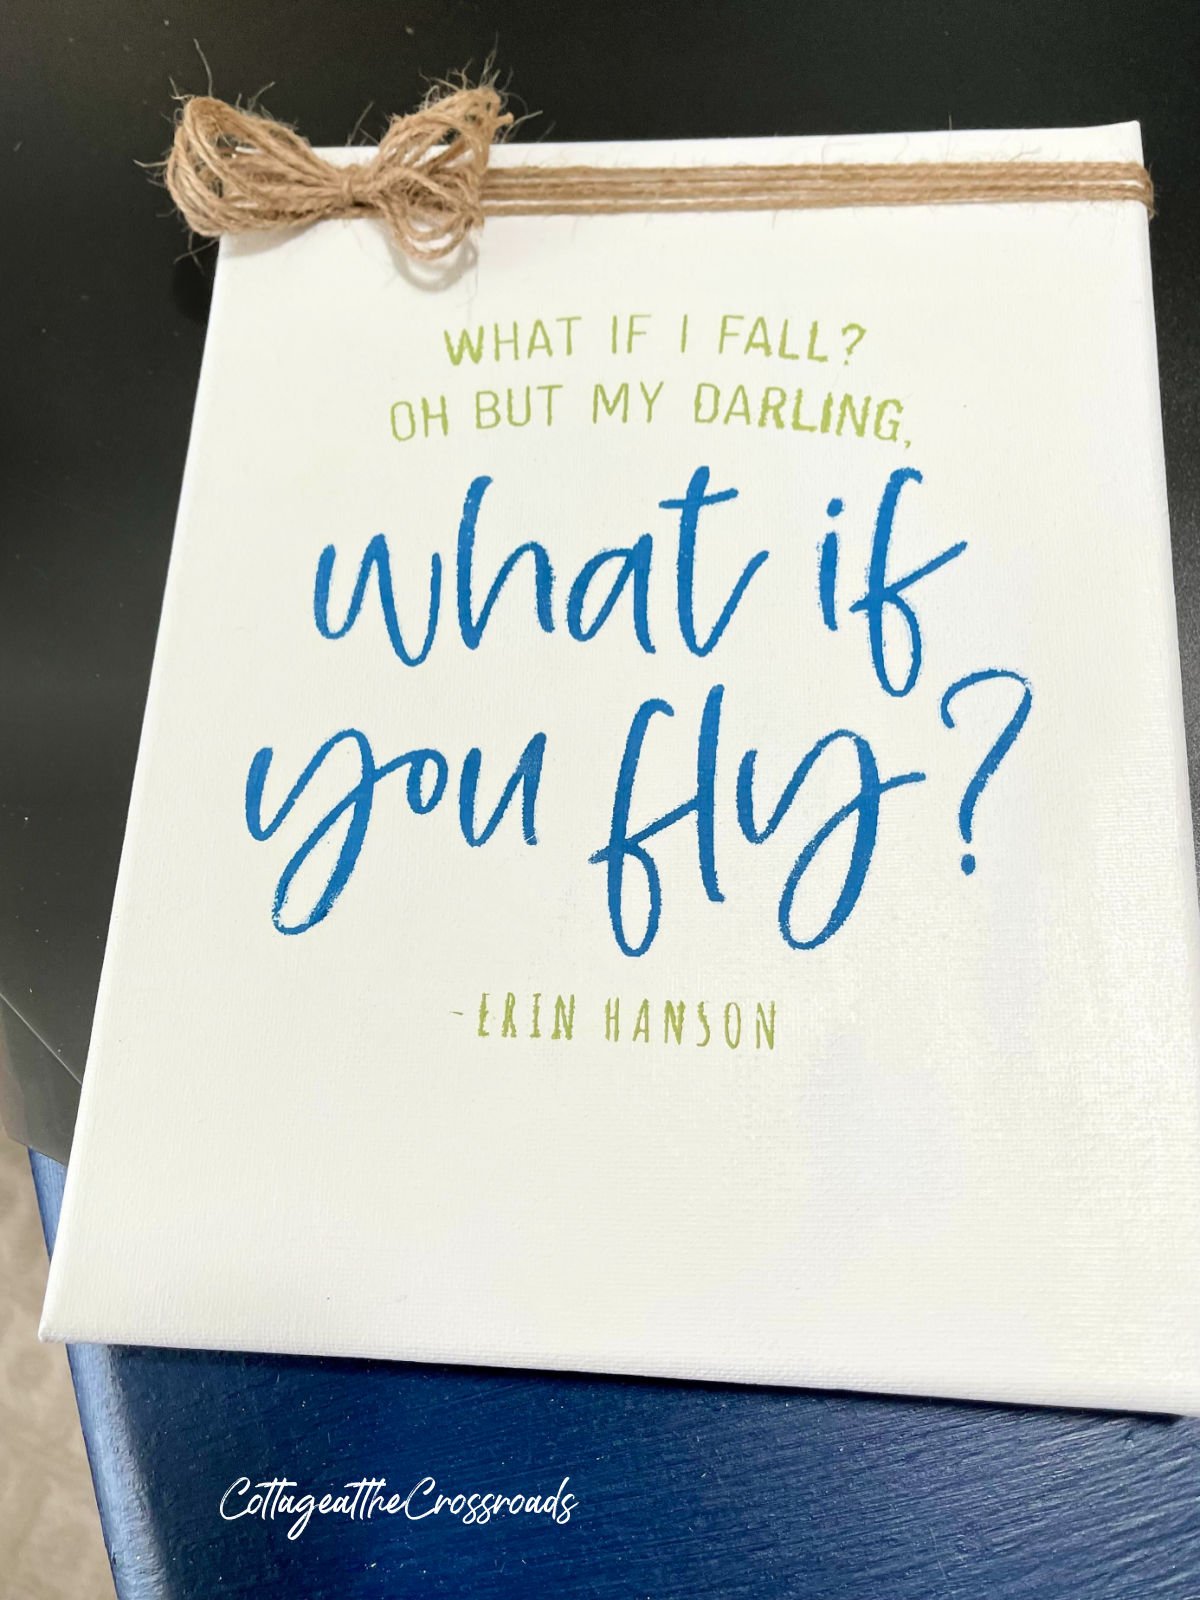 Sign that says what if i fall? Oh but my darling what if you fly